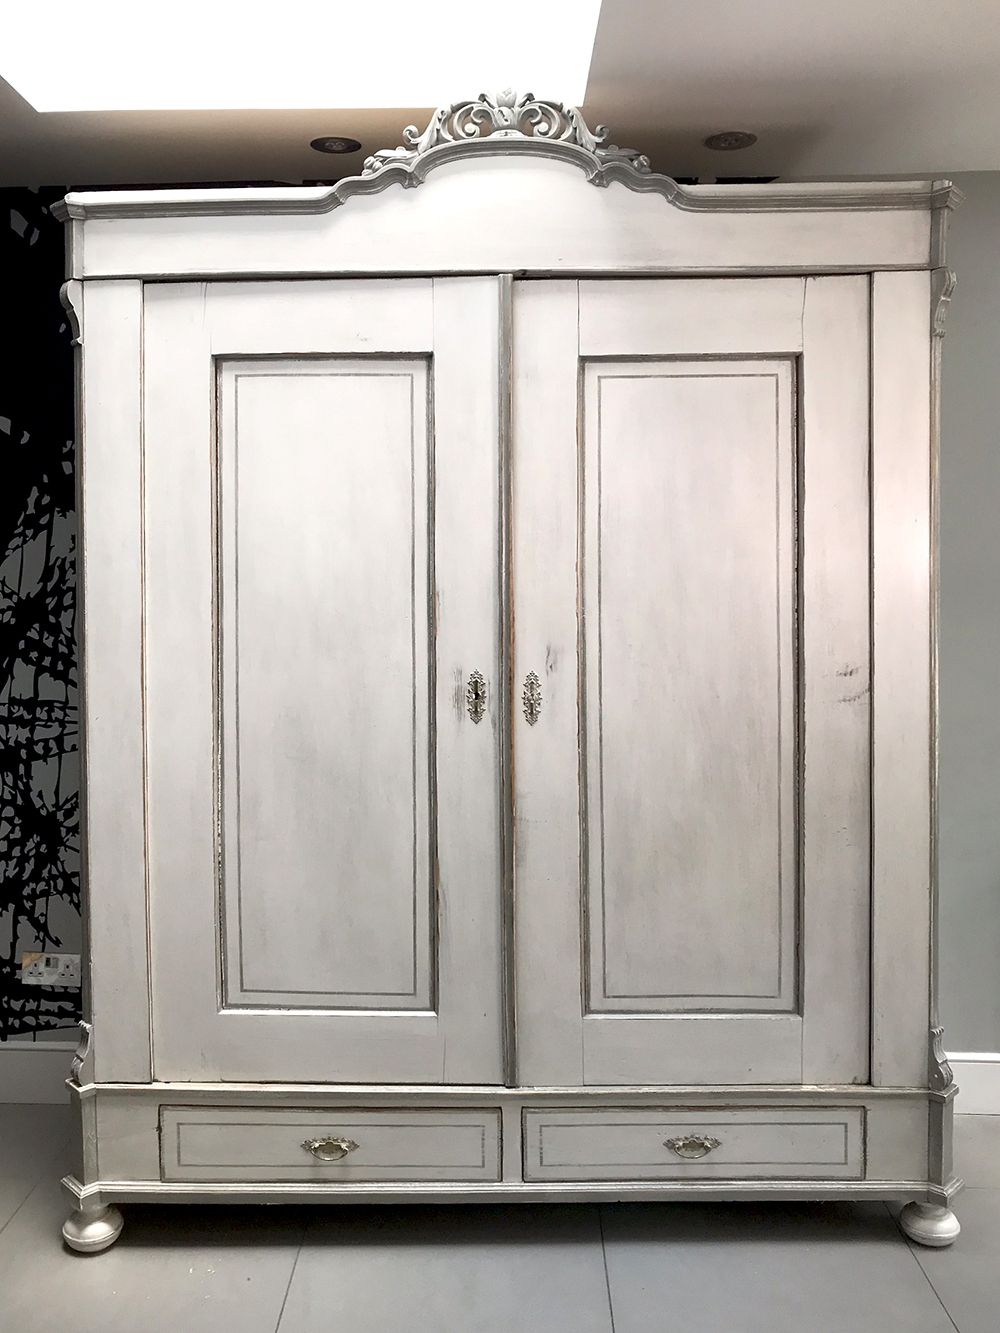 Antique French Painted Armoire – Sold | Napoleonrockefeller – Vintage And  Retro Furniture, Bespoke Hand Crafted Chairs And Seating Intended For Vintage French Wardrobes (Gallery 3 of 20)